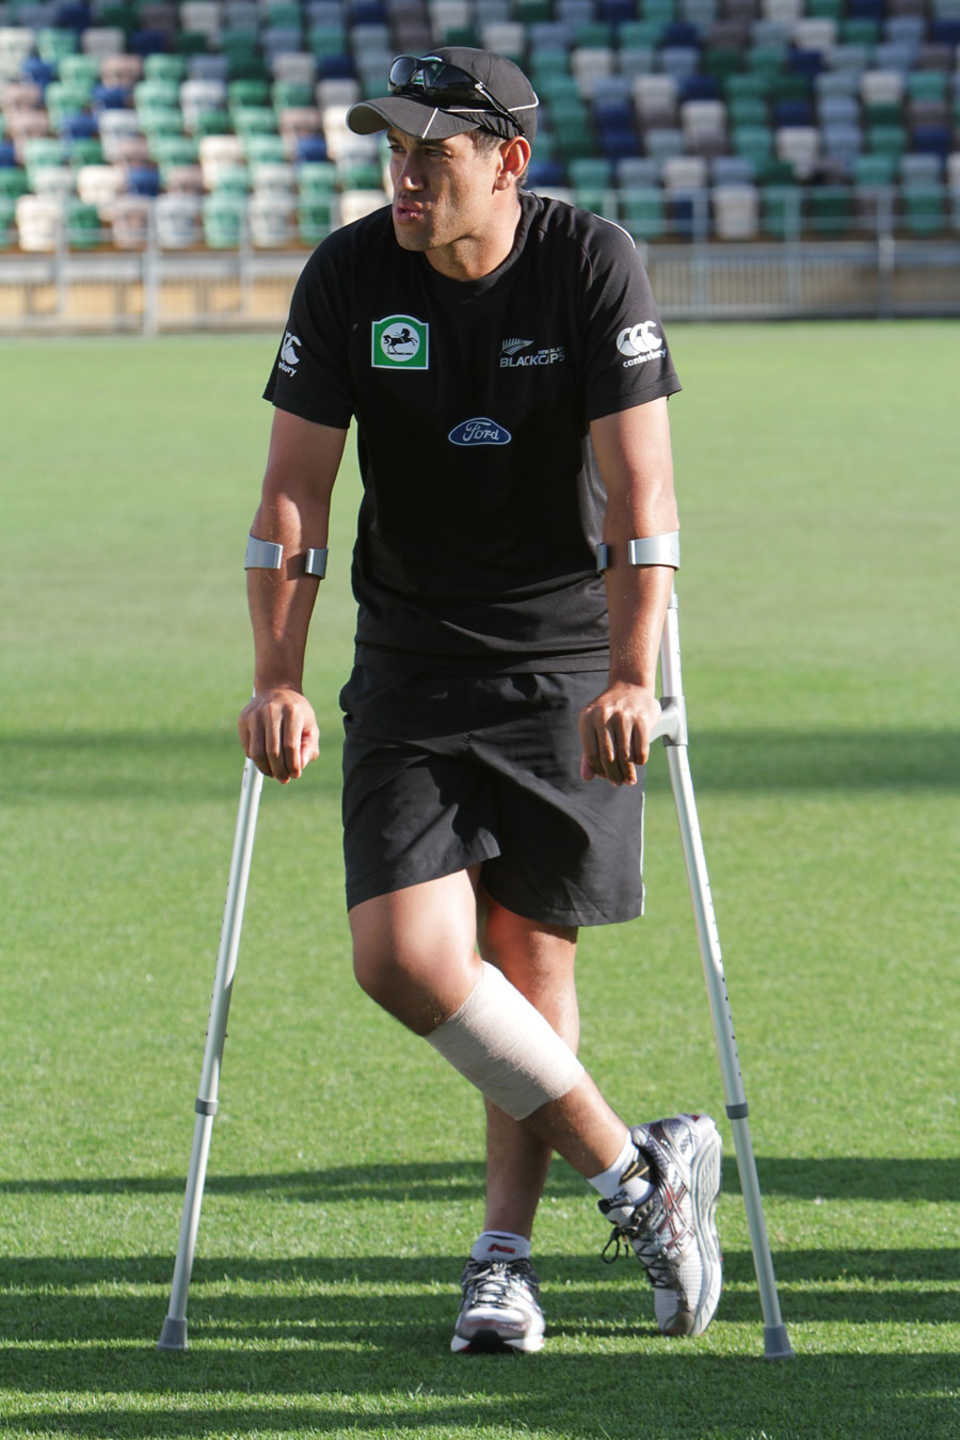 Ross Taylor had picked up a calf injury during the Test